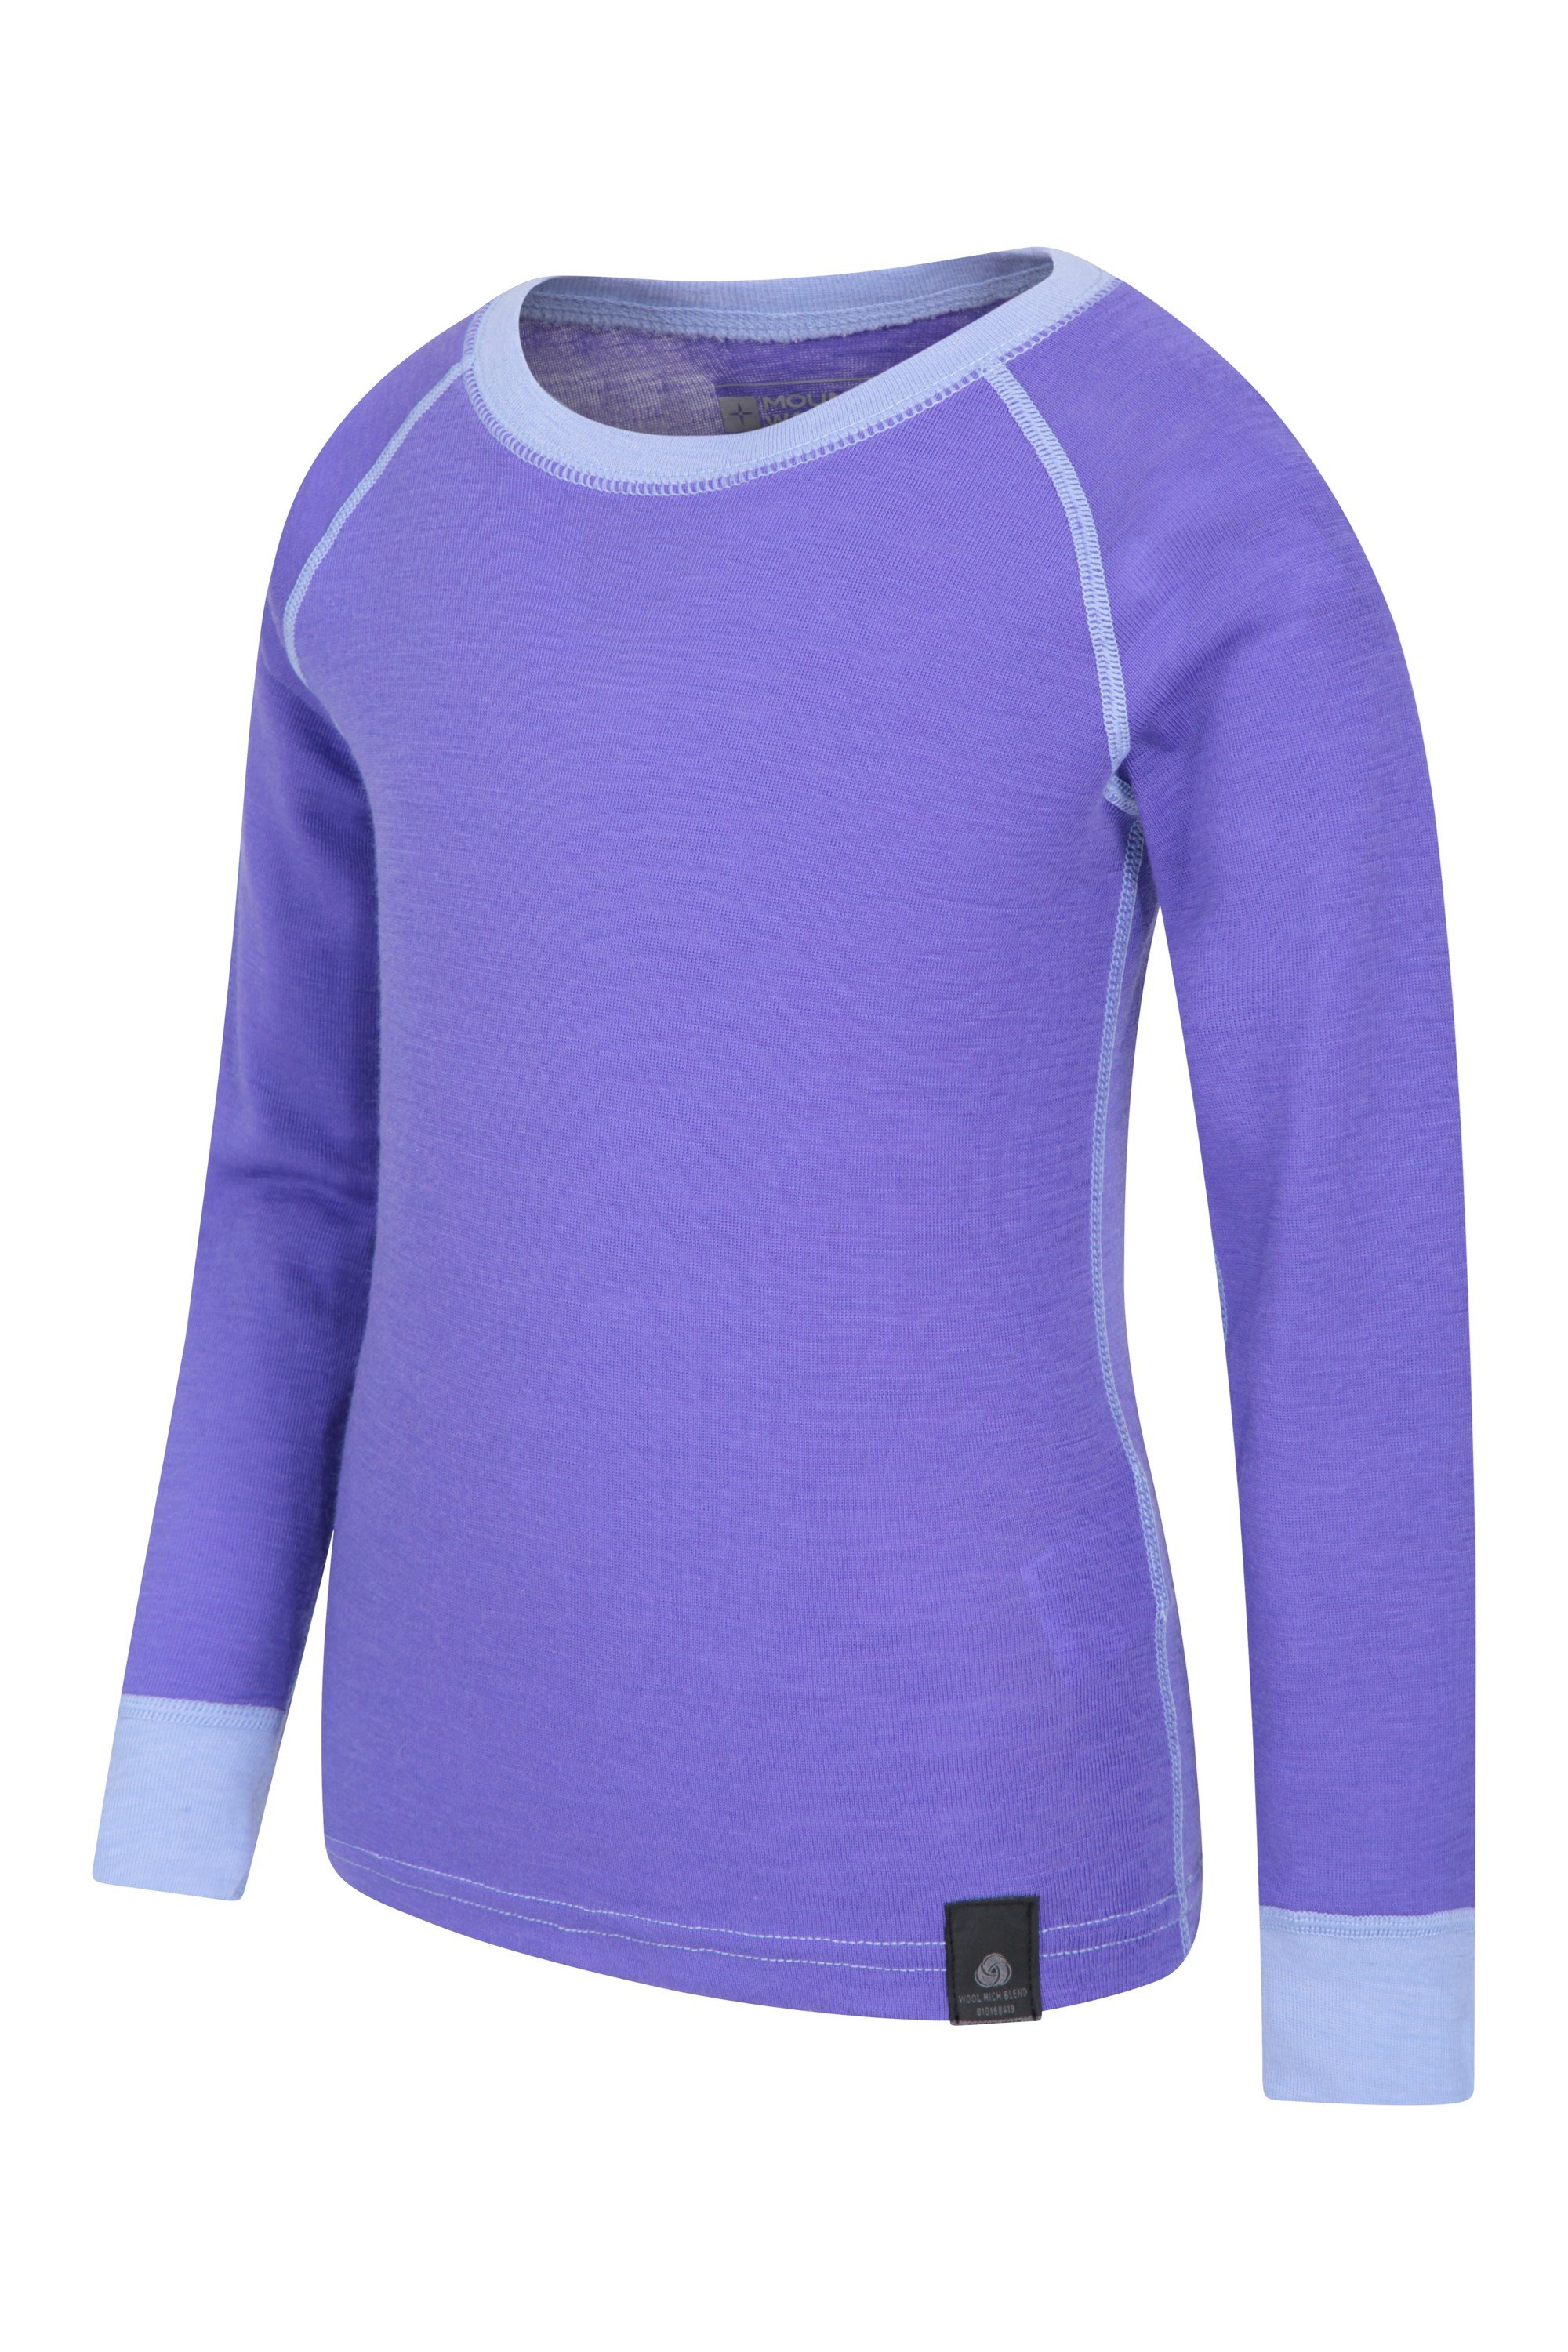 Pink Ages 3-12 Details about   MountainWarehouse Snow Kid's Round Neck Top Thermal Base Layer 